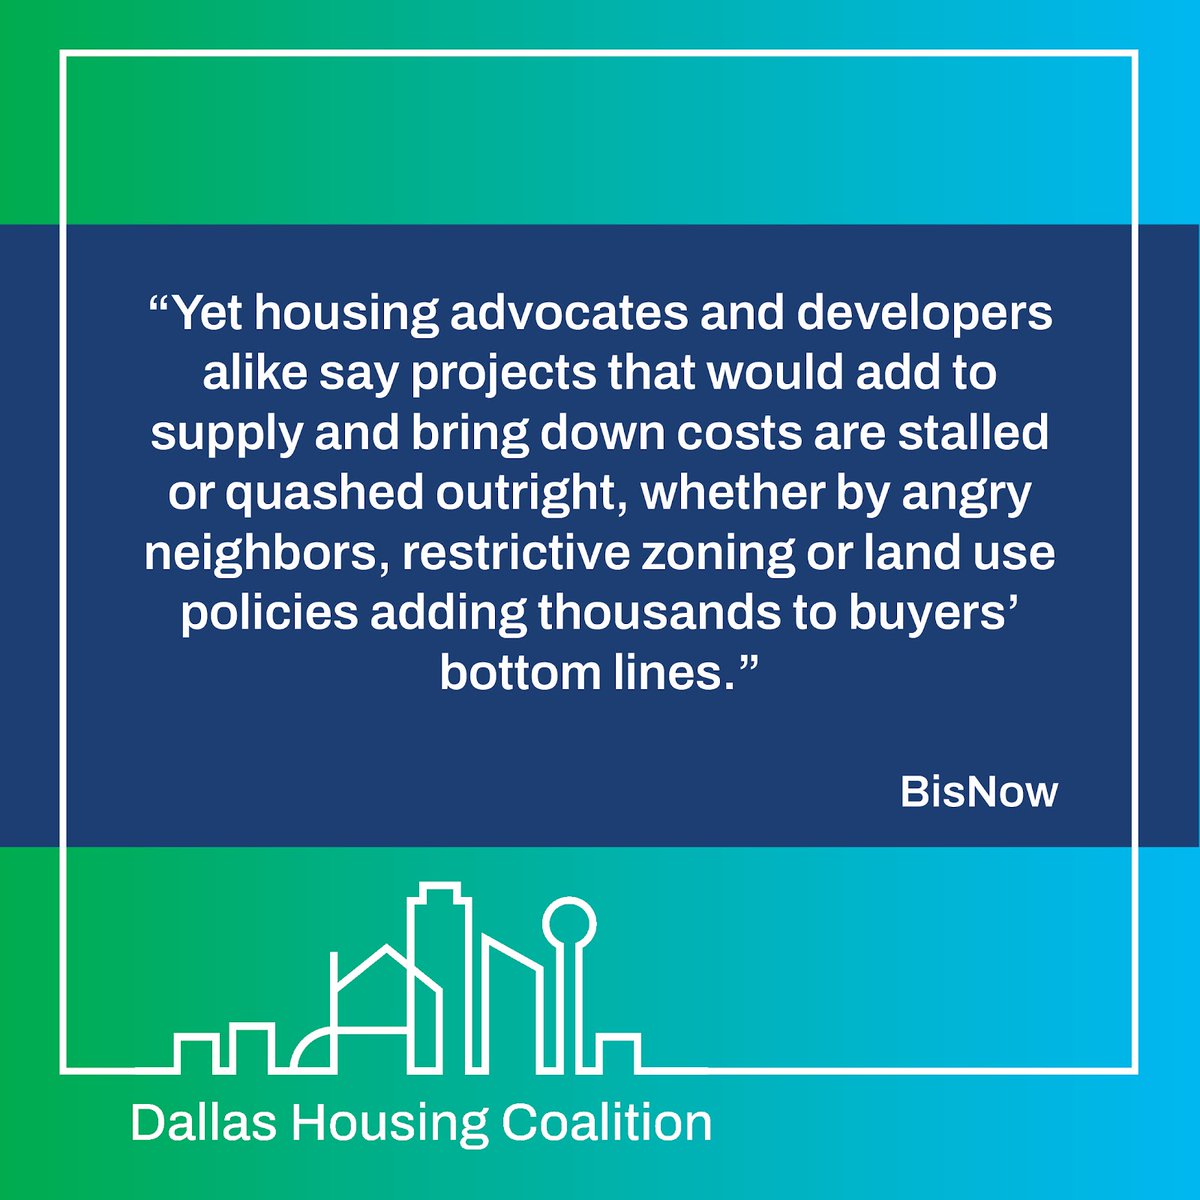 Part 2 of Bisnow's series on the Texas housing crisis delves into how frustrated neighbors, aging policies, and the lack of will exacerbate the state’s affordability crisis. We are in urgent need of housing solutions. #TexasHousing #HousingForAll bit.ly/41RSBqU